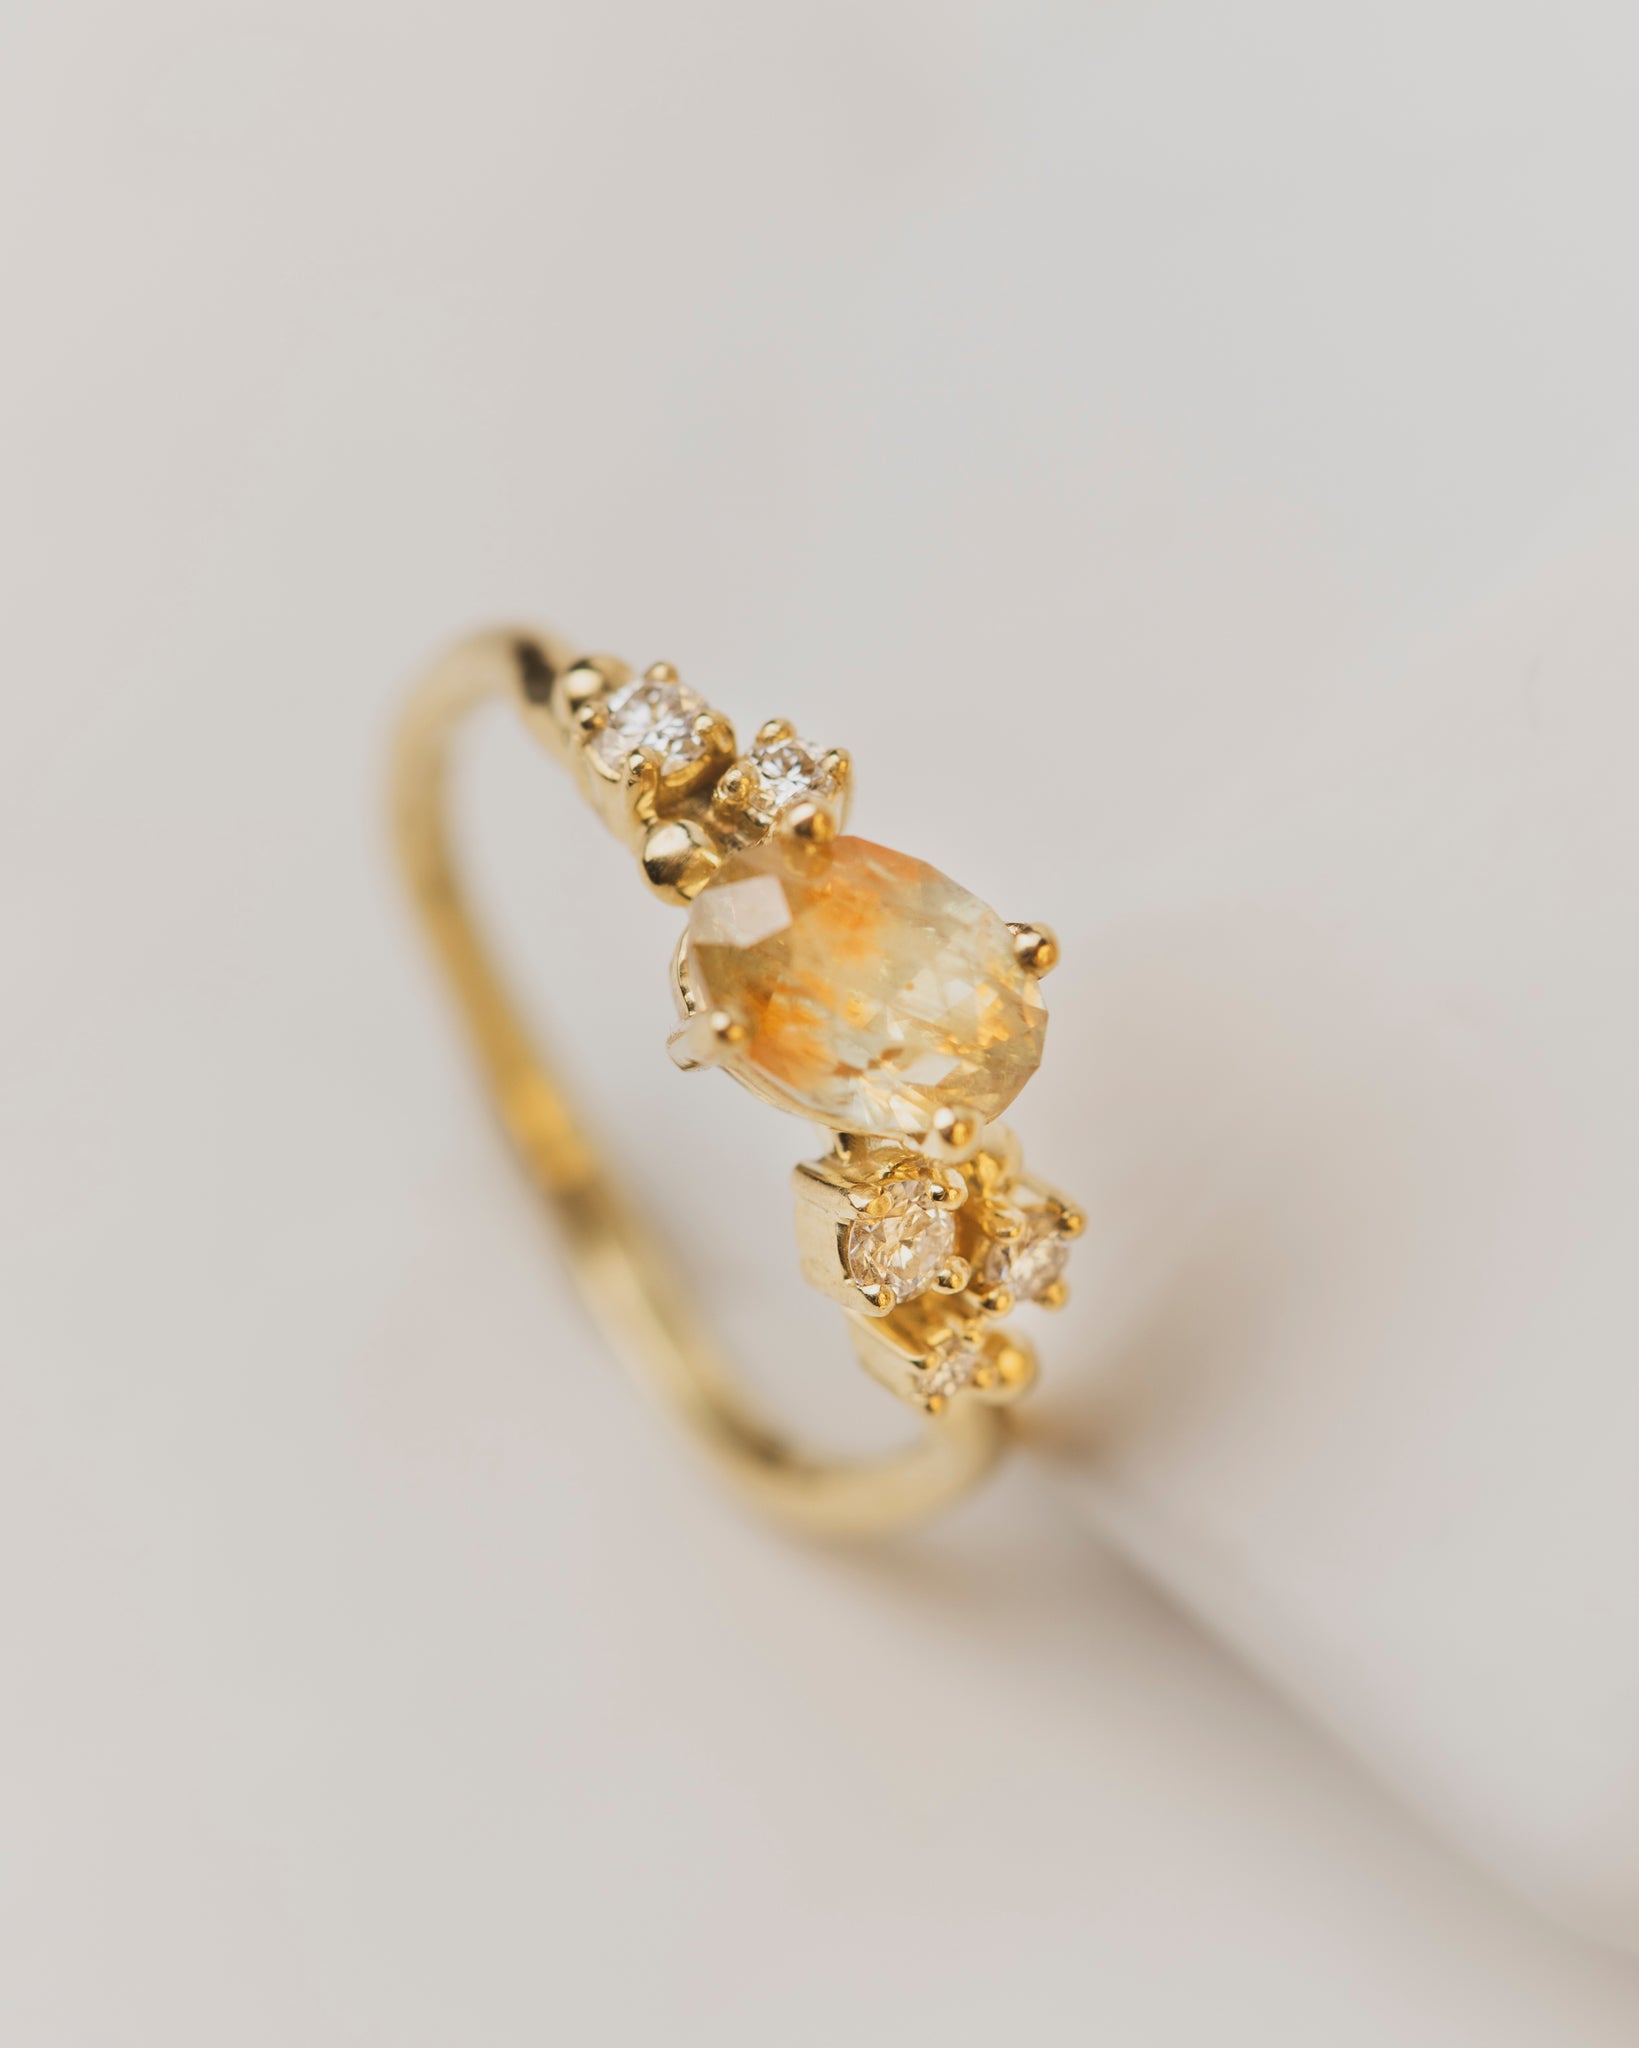 This 1.52 carat yellow and orange hued sapphire is nestled in a cluster of five white diamonds set in 18K yellow gold